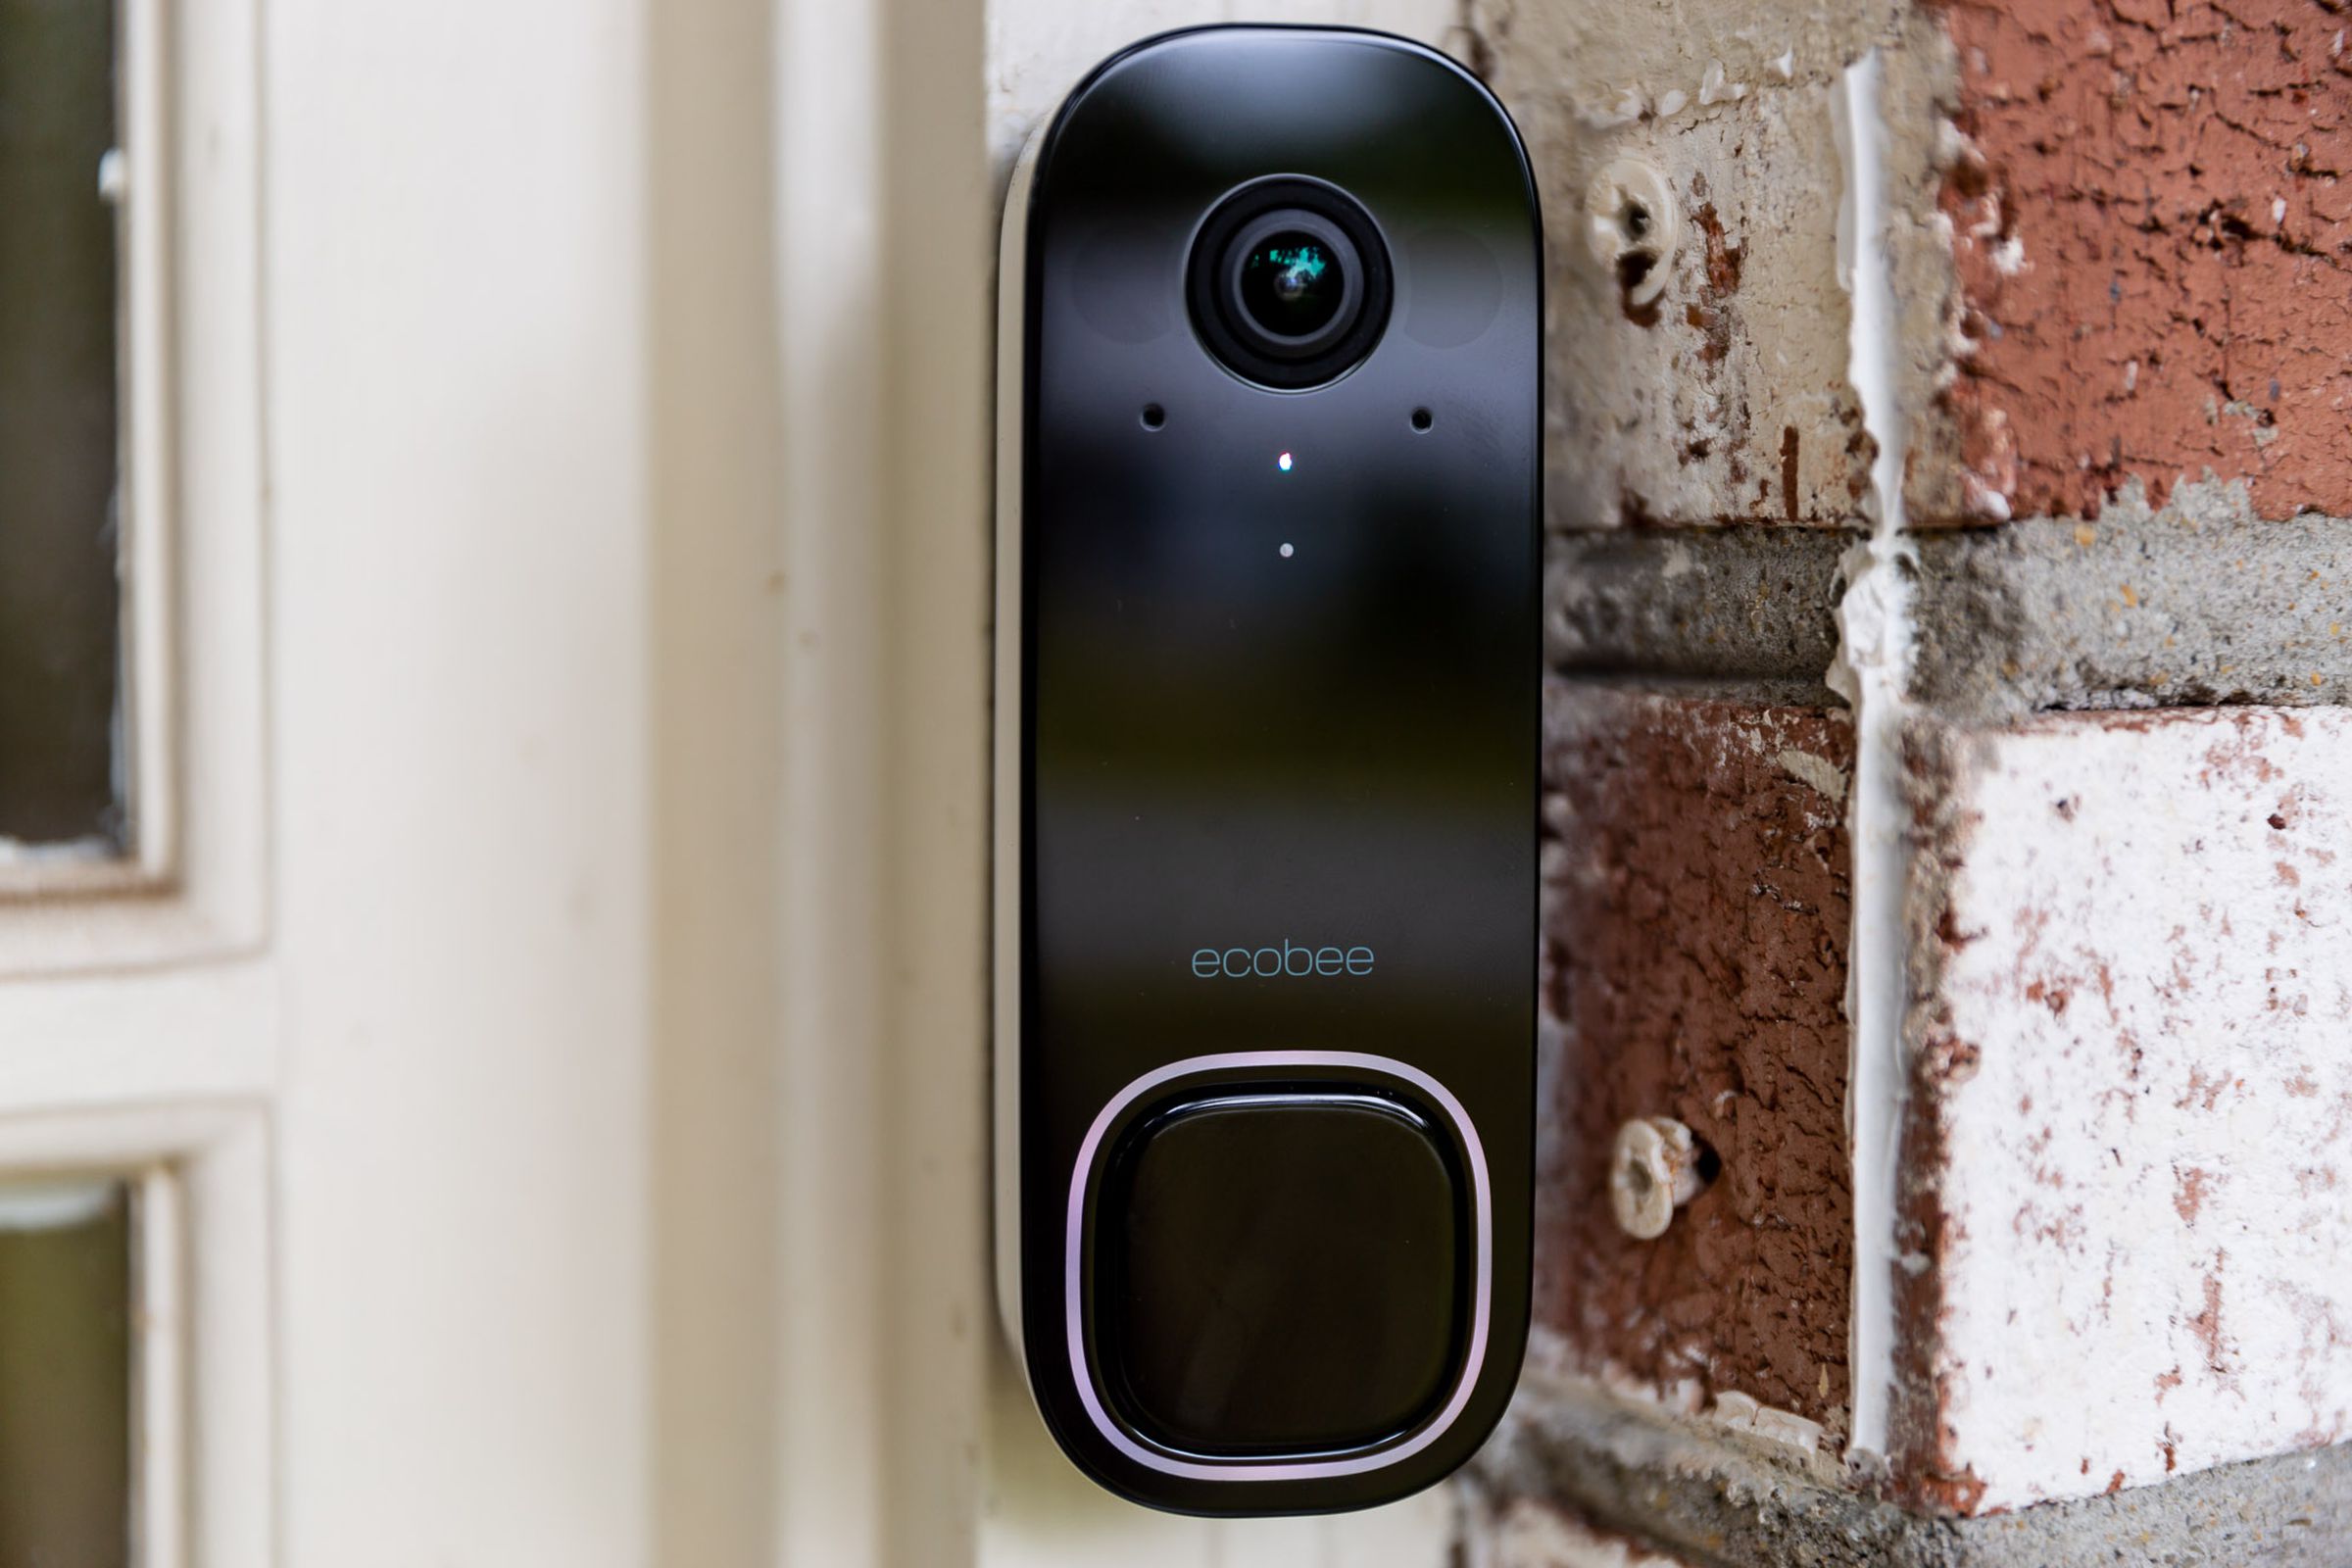 The newest product from Smart Thermostat company Ecobee is a smart video doorbell that uses radar and computer vision to tell you when there’s a person or a package at your door, but nothing else.